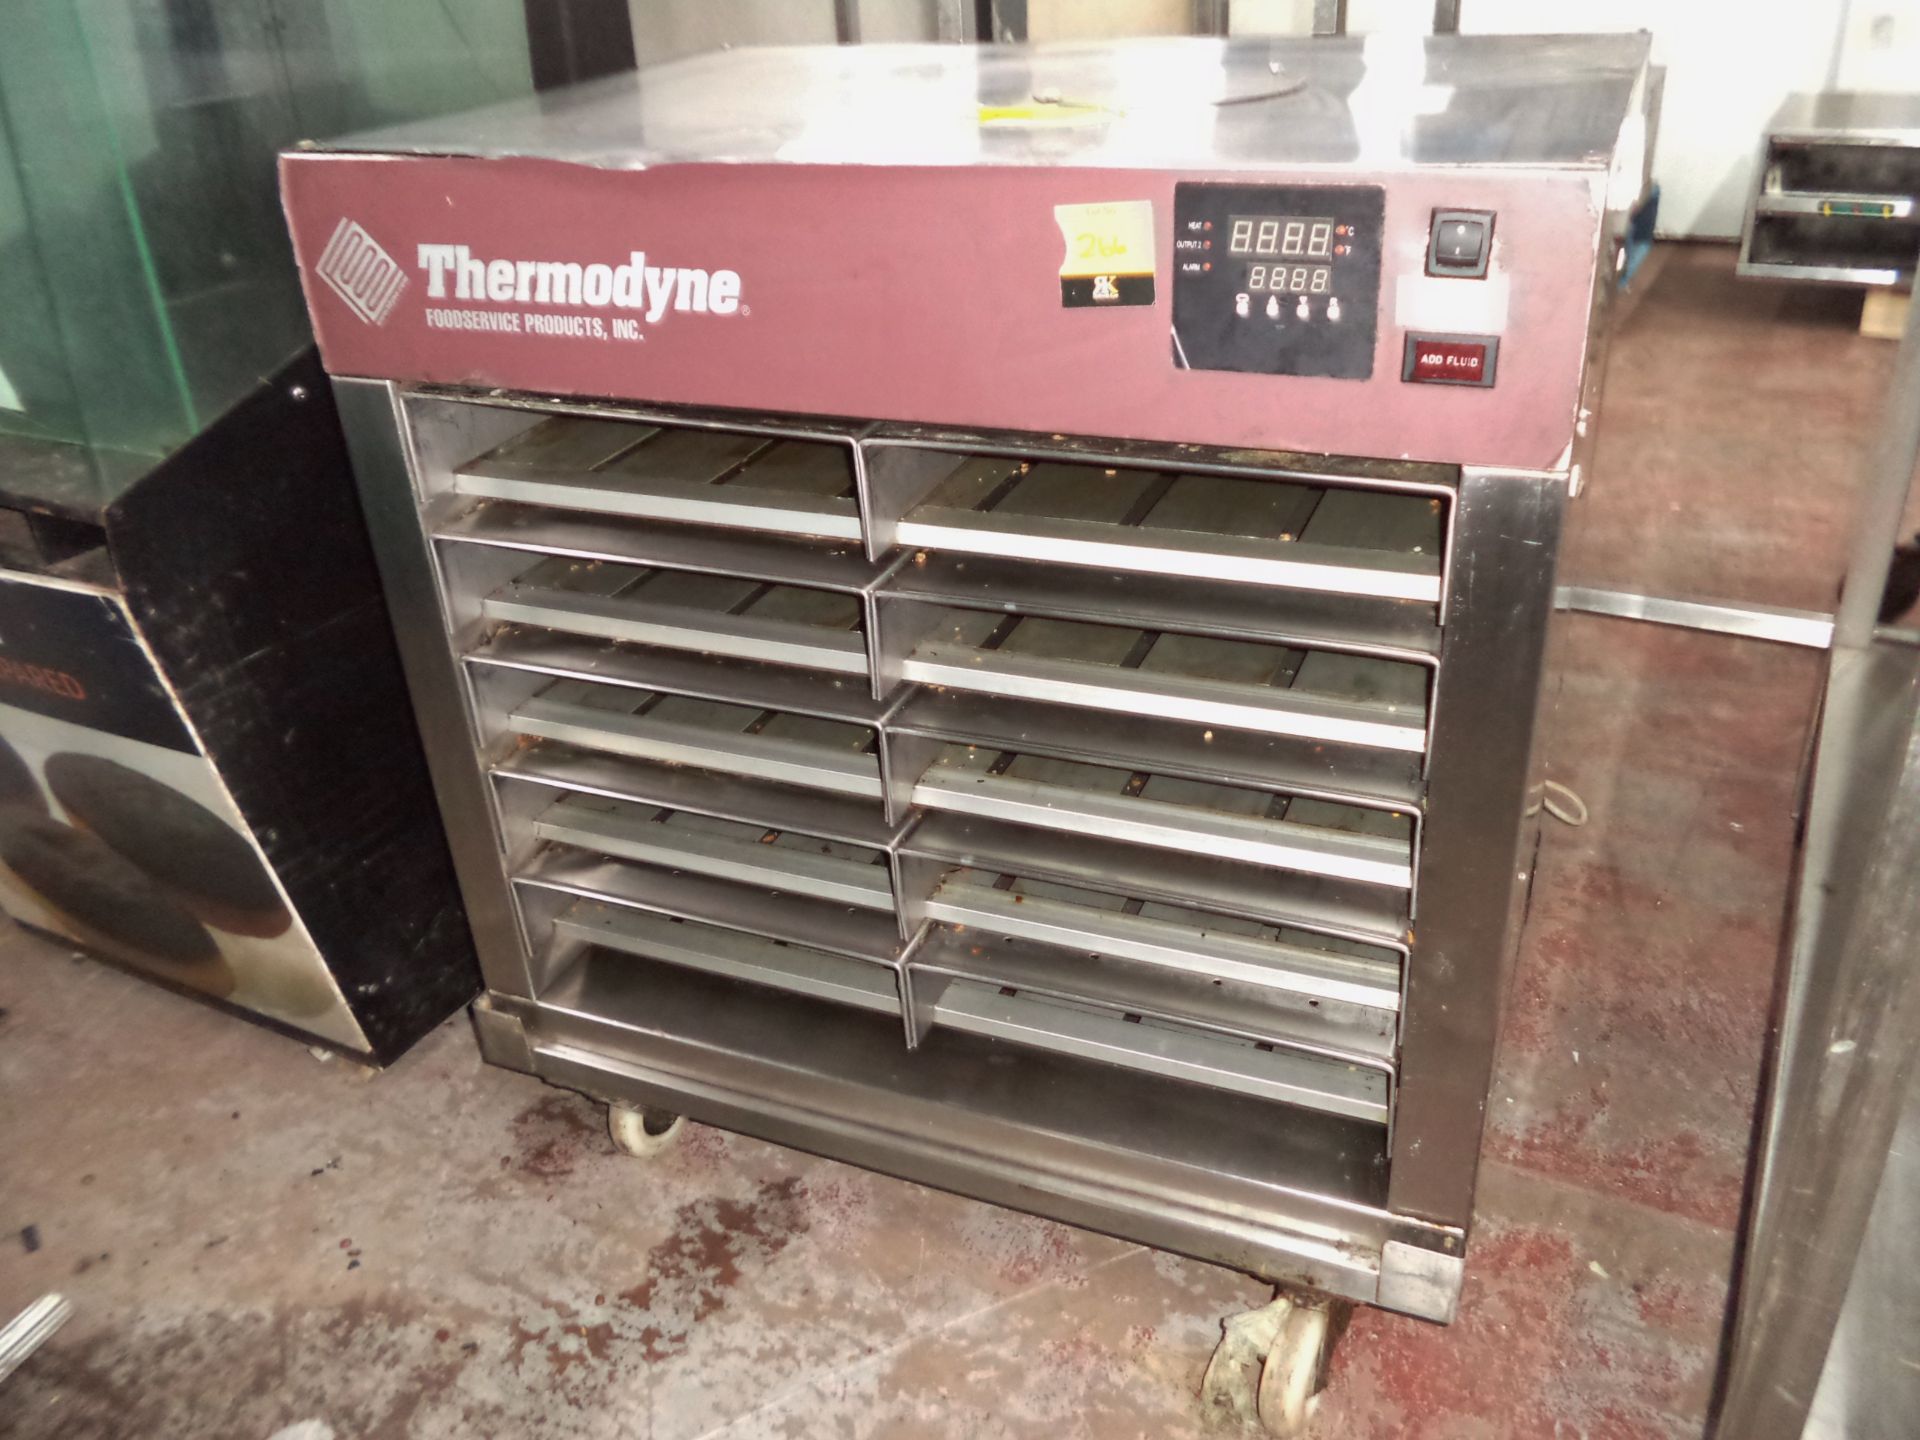 Thermodyne mobile model 700NDNL warming unit IMPORTANT: Please remember goods successfully bid - Image 2 of 3